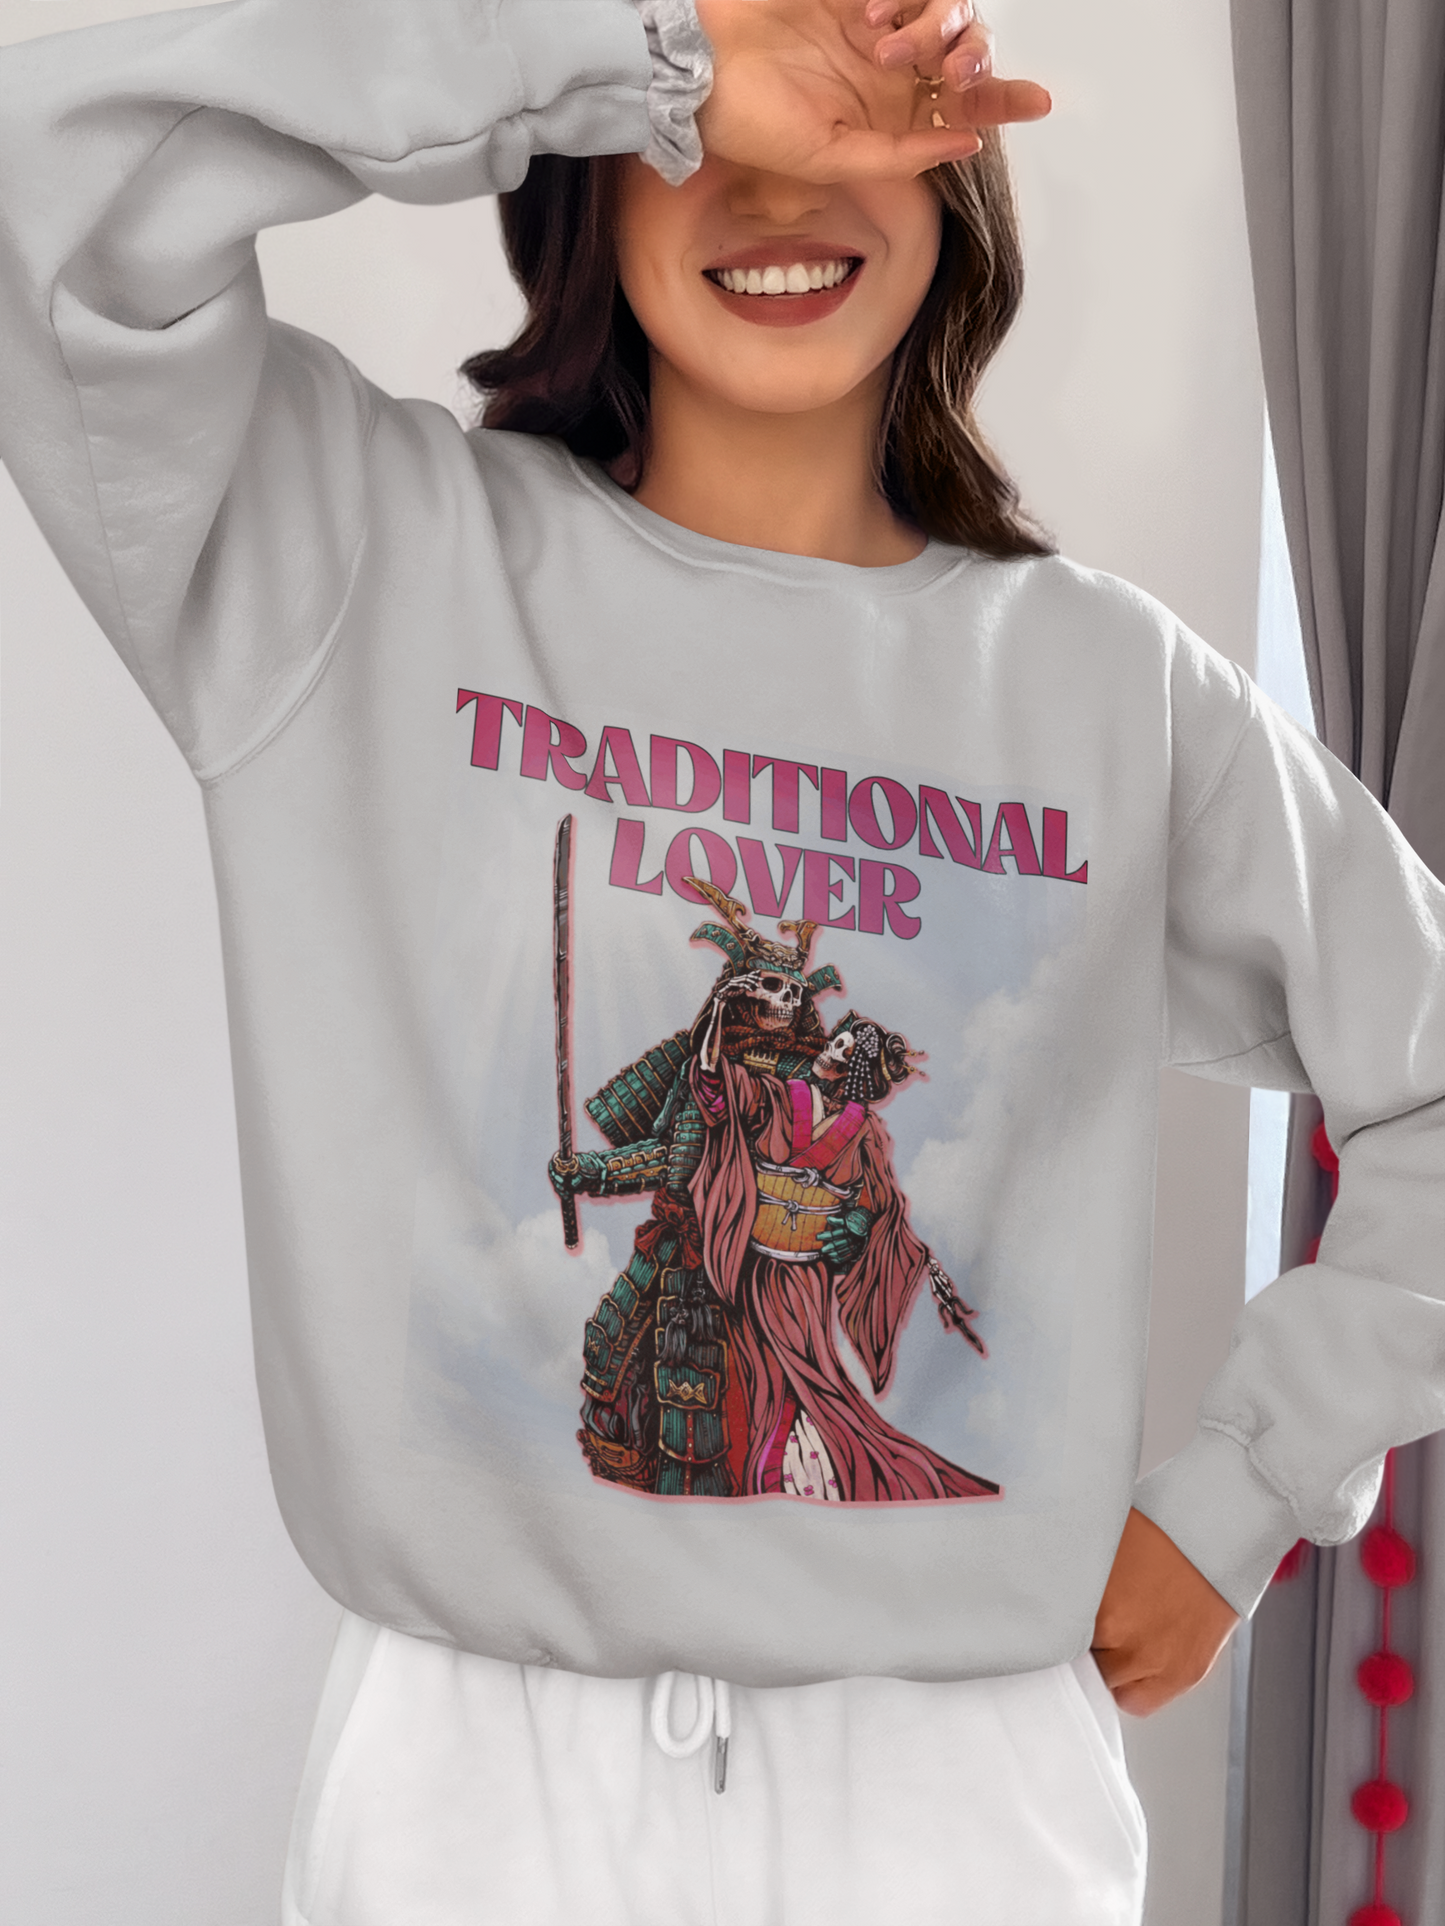 TRADITIONAL LOVER - Unisex